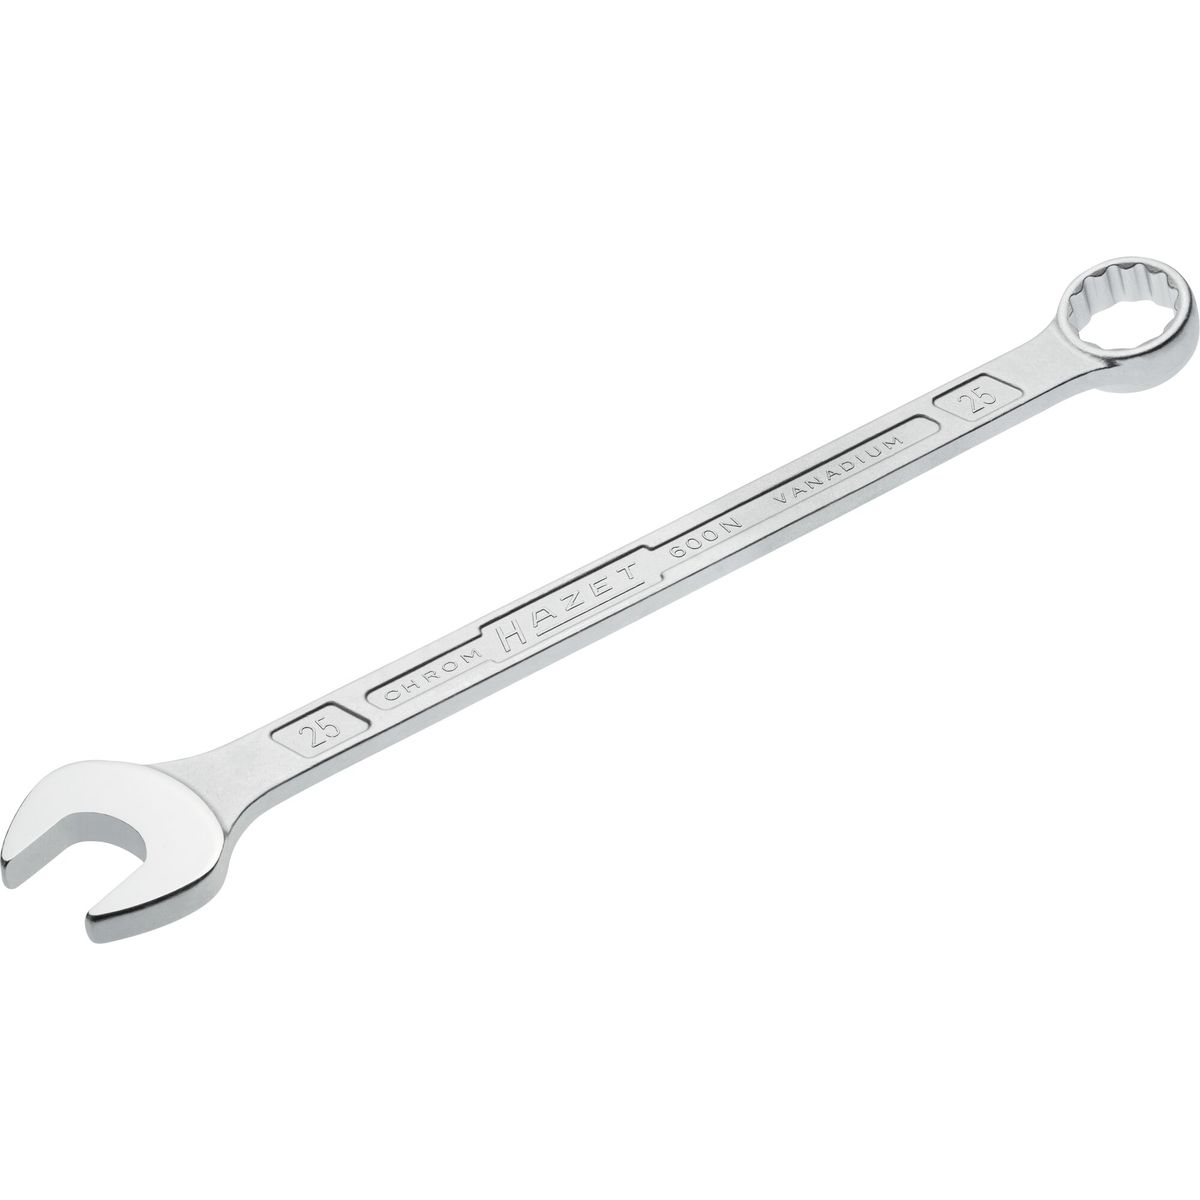 Combination Wrench No.600N-25 Hazet®